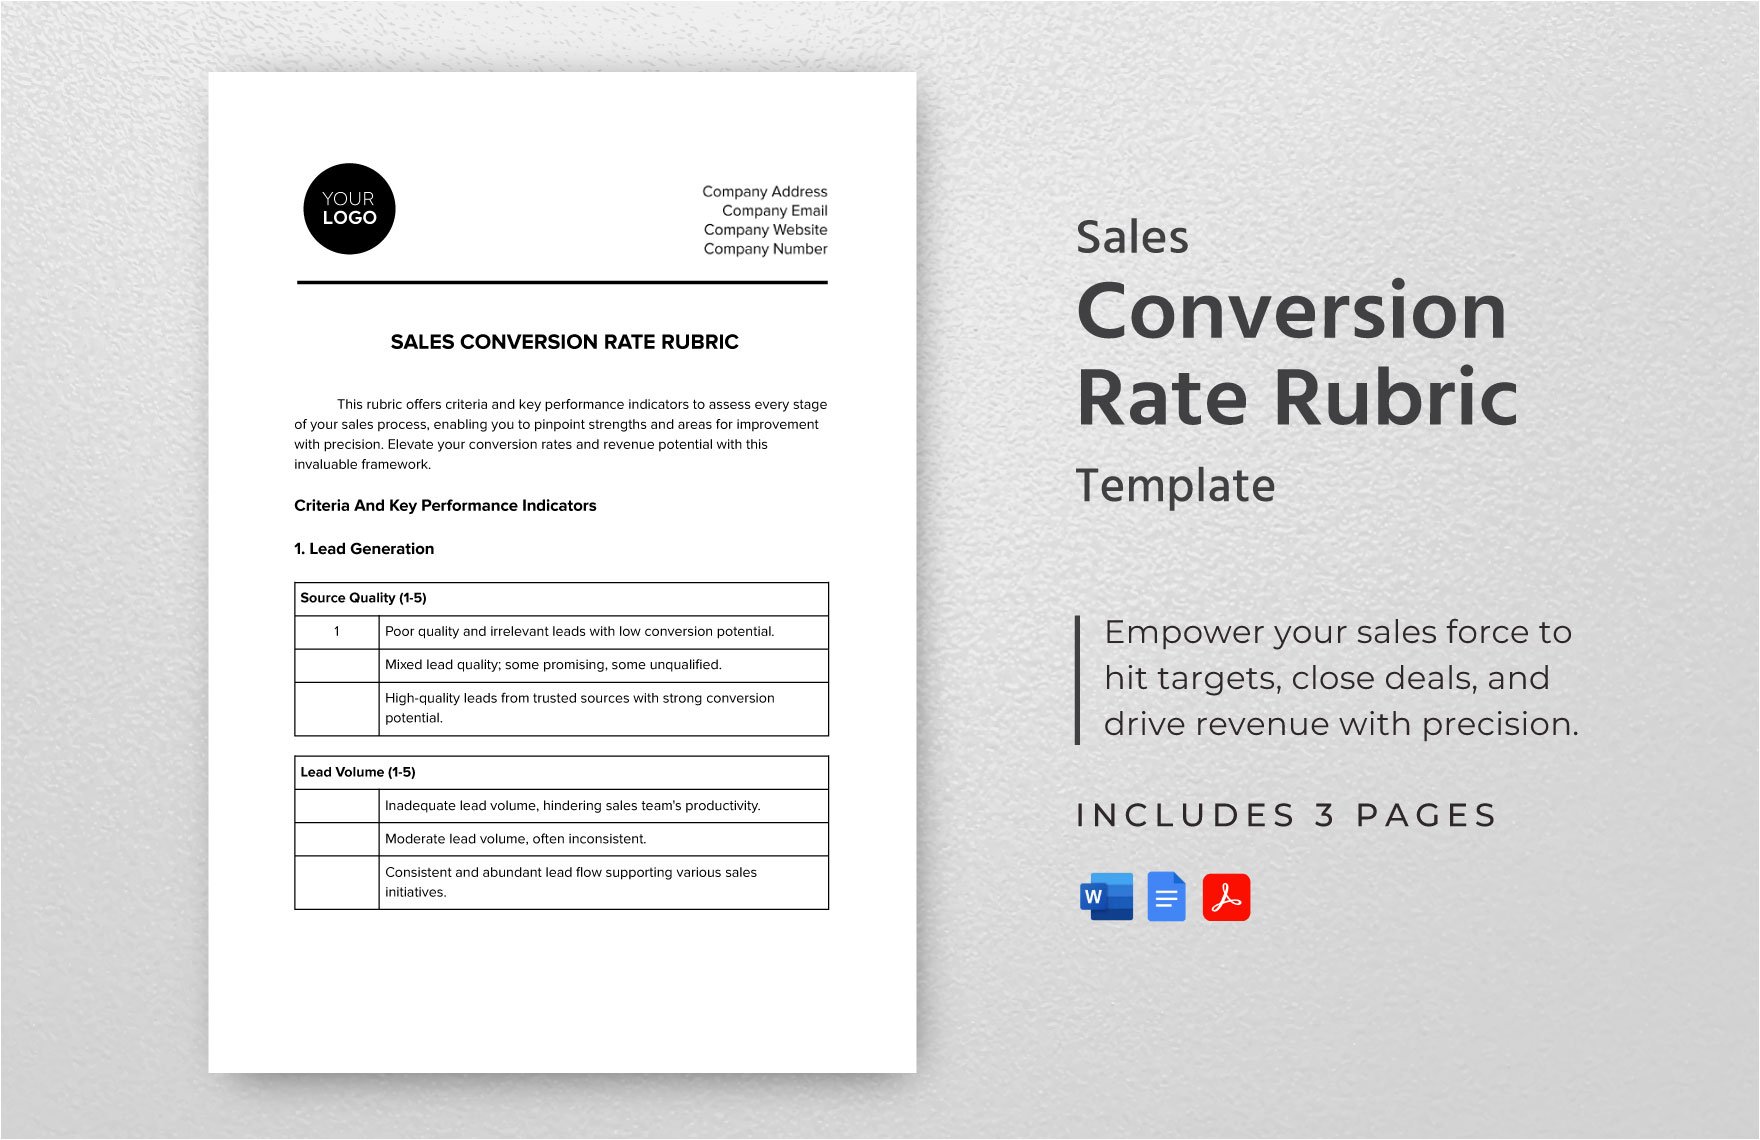 Sales Conversion Rate Rubric Template